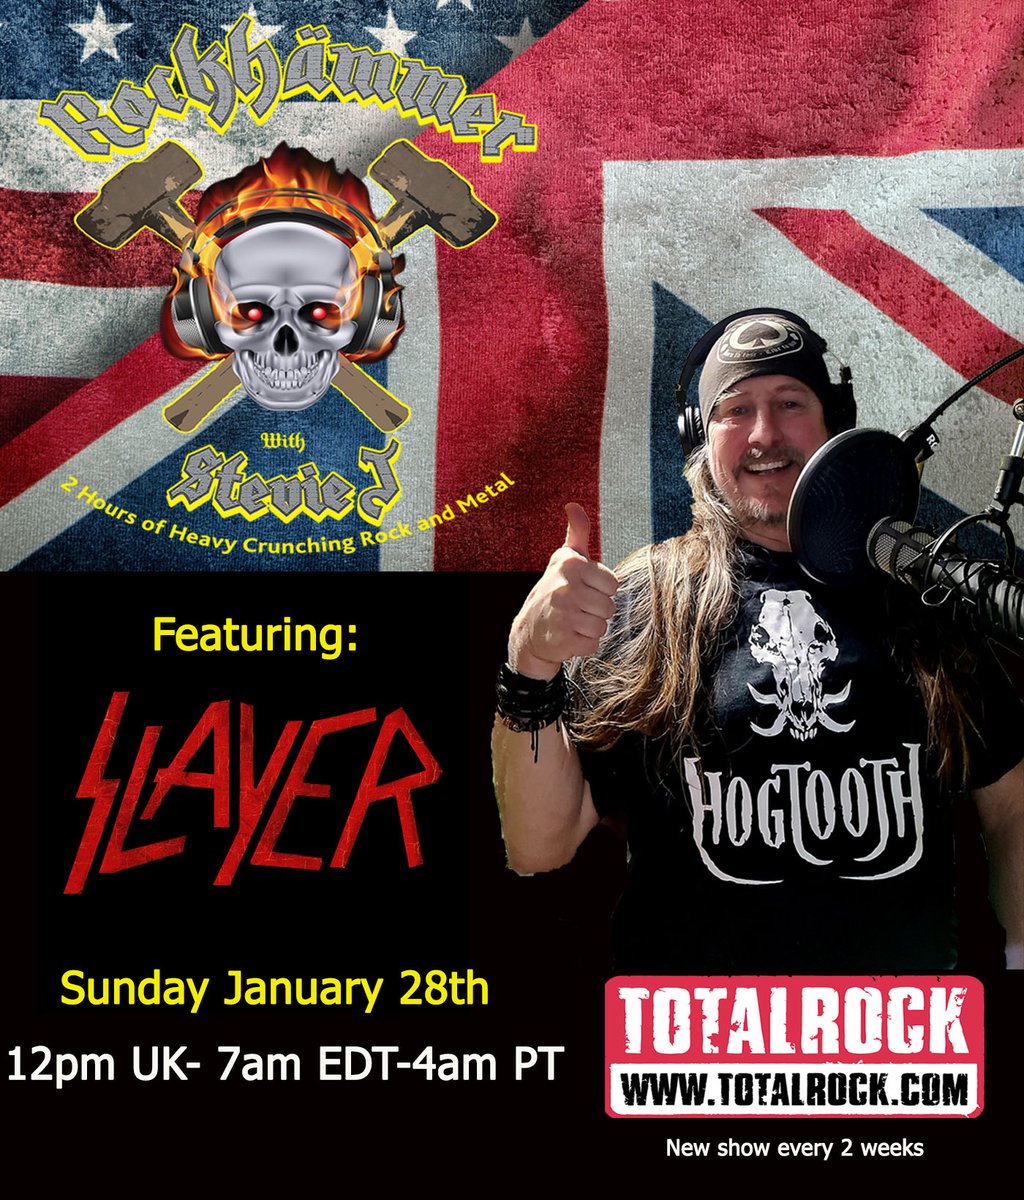 Its all going a bit hectic Sunday on #Rockhammer because @Slayer are in town! I'll be bringing you new tracks from @SaxonOfficial @AshenReach @TransitMethod @TheObsessedOFC as well as classics from @judaspriest @Anthrax & @myMotorhead Pop in the chat tinyurl.com/3v26adxr 👍